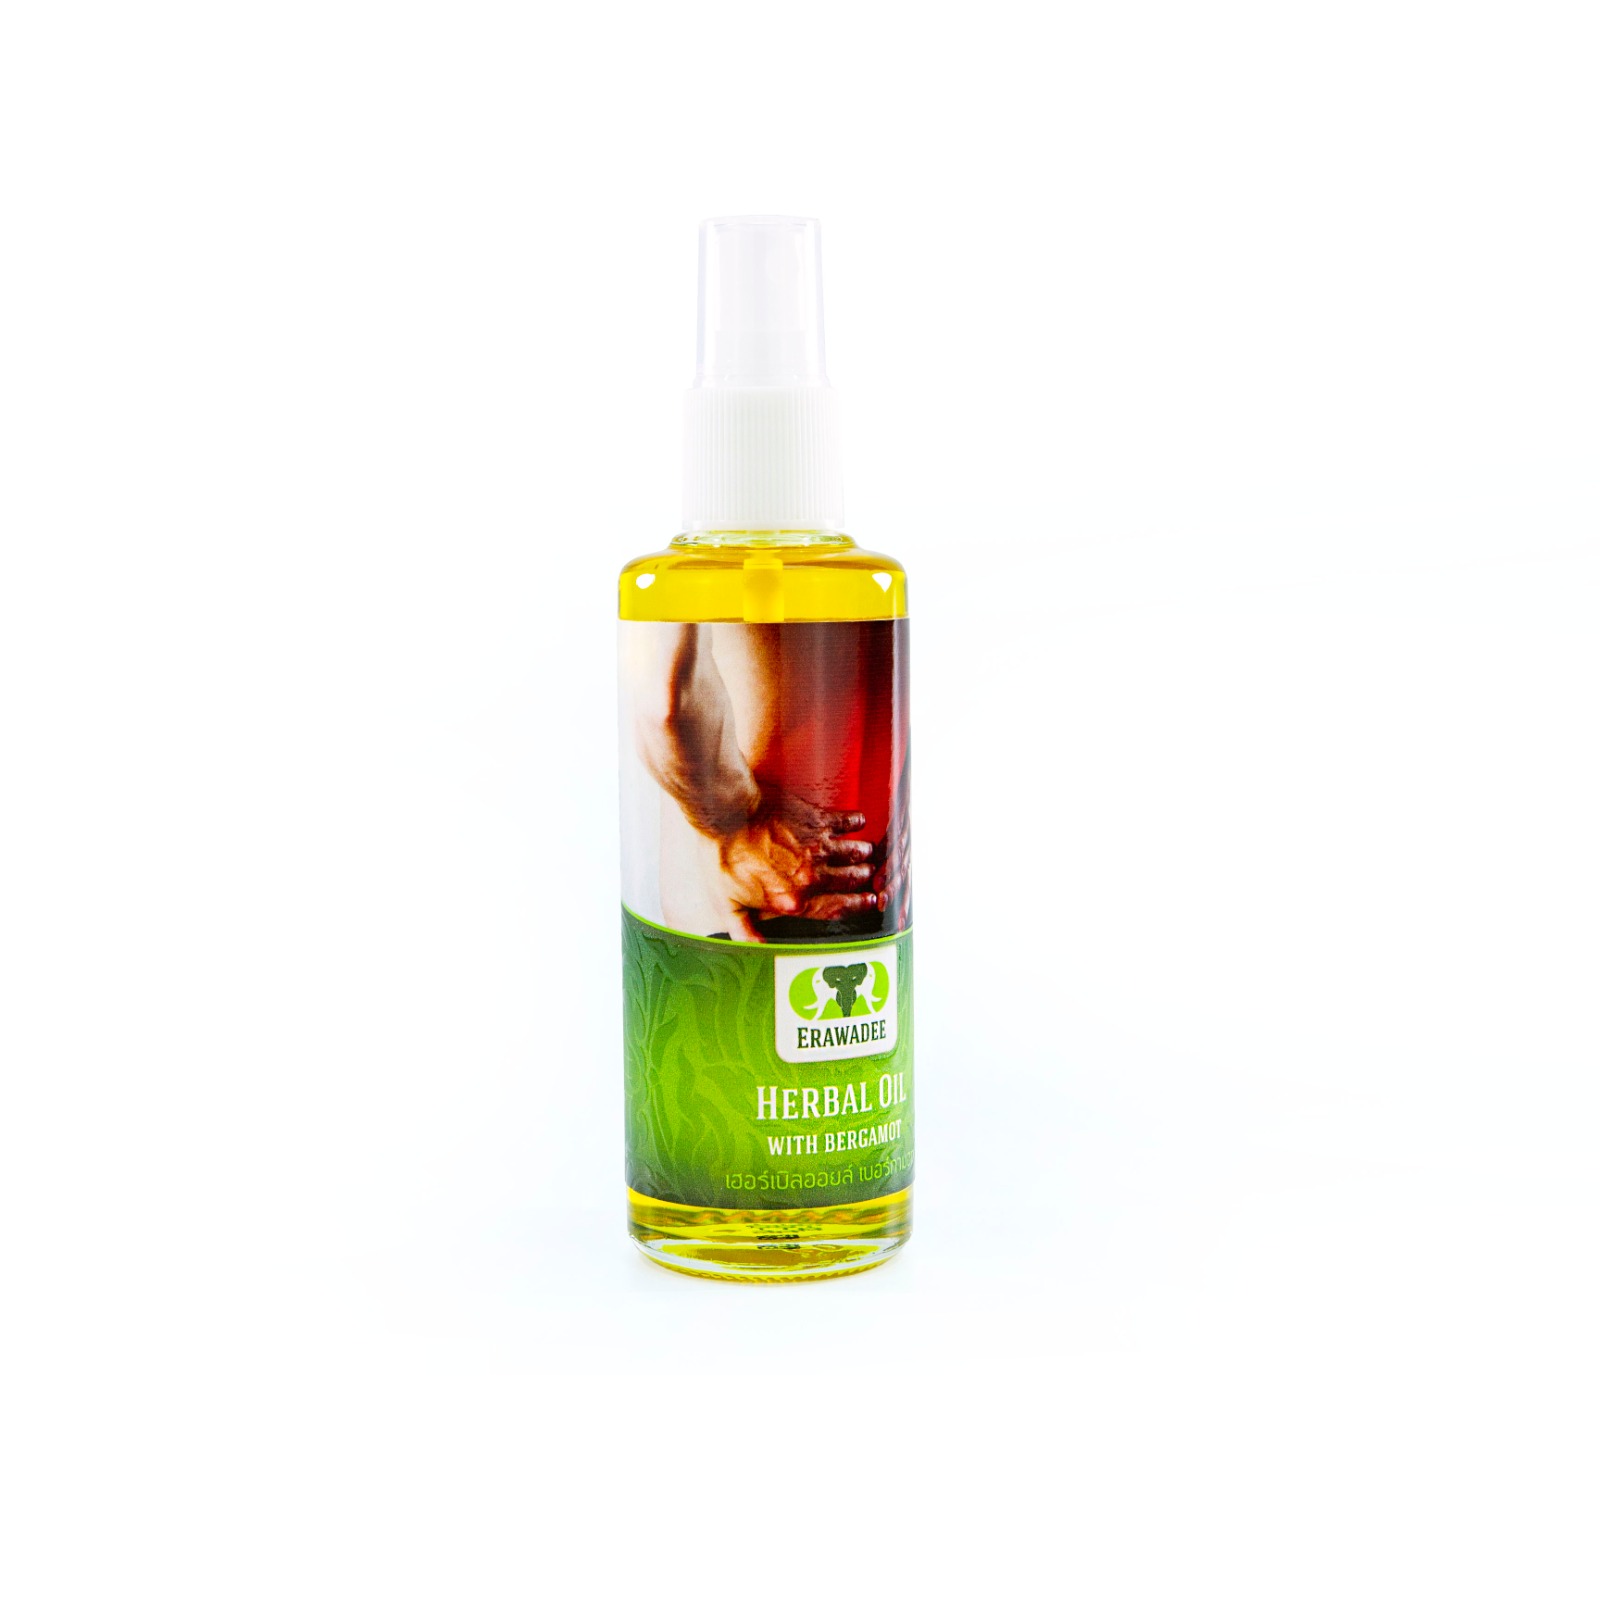 No.60 Herbal Oil with Lemongrass